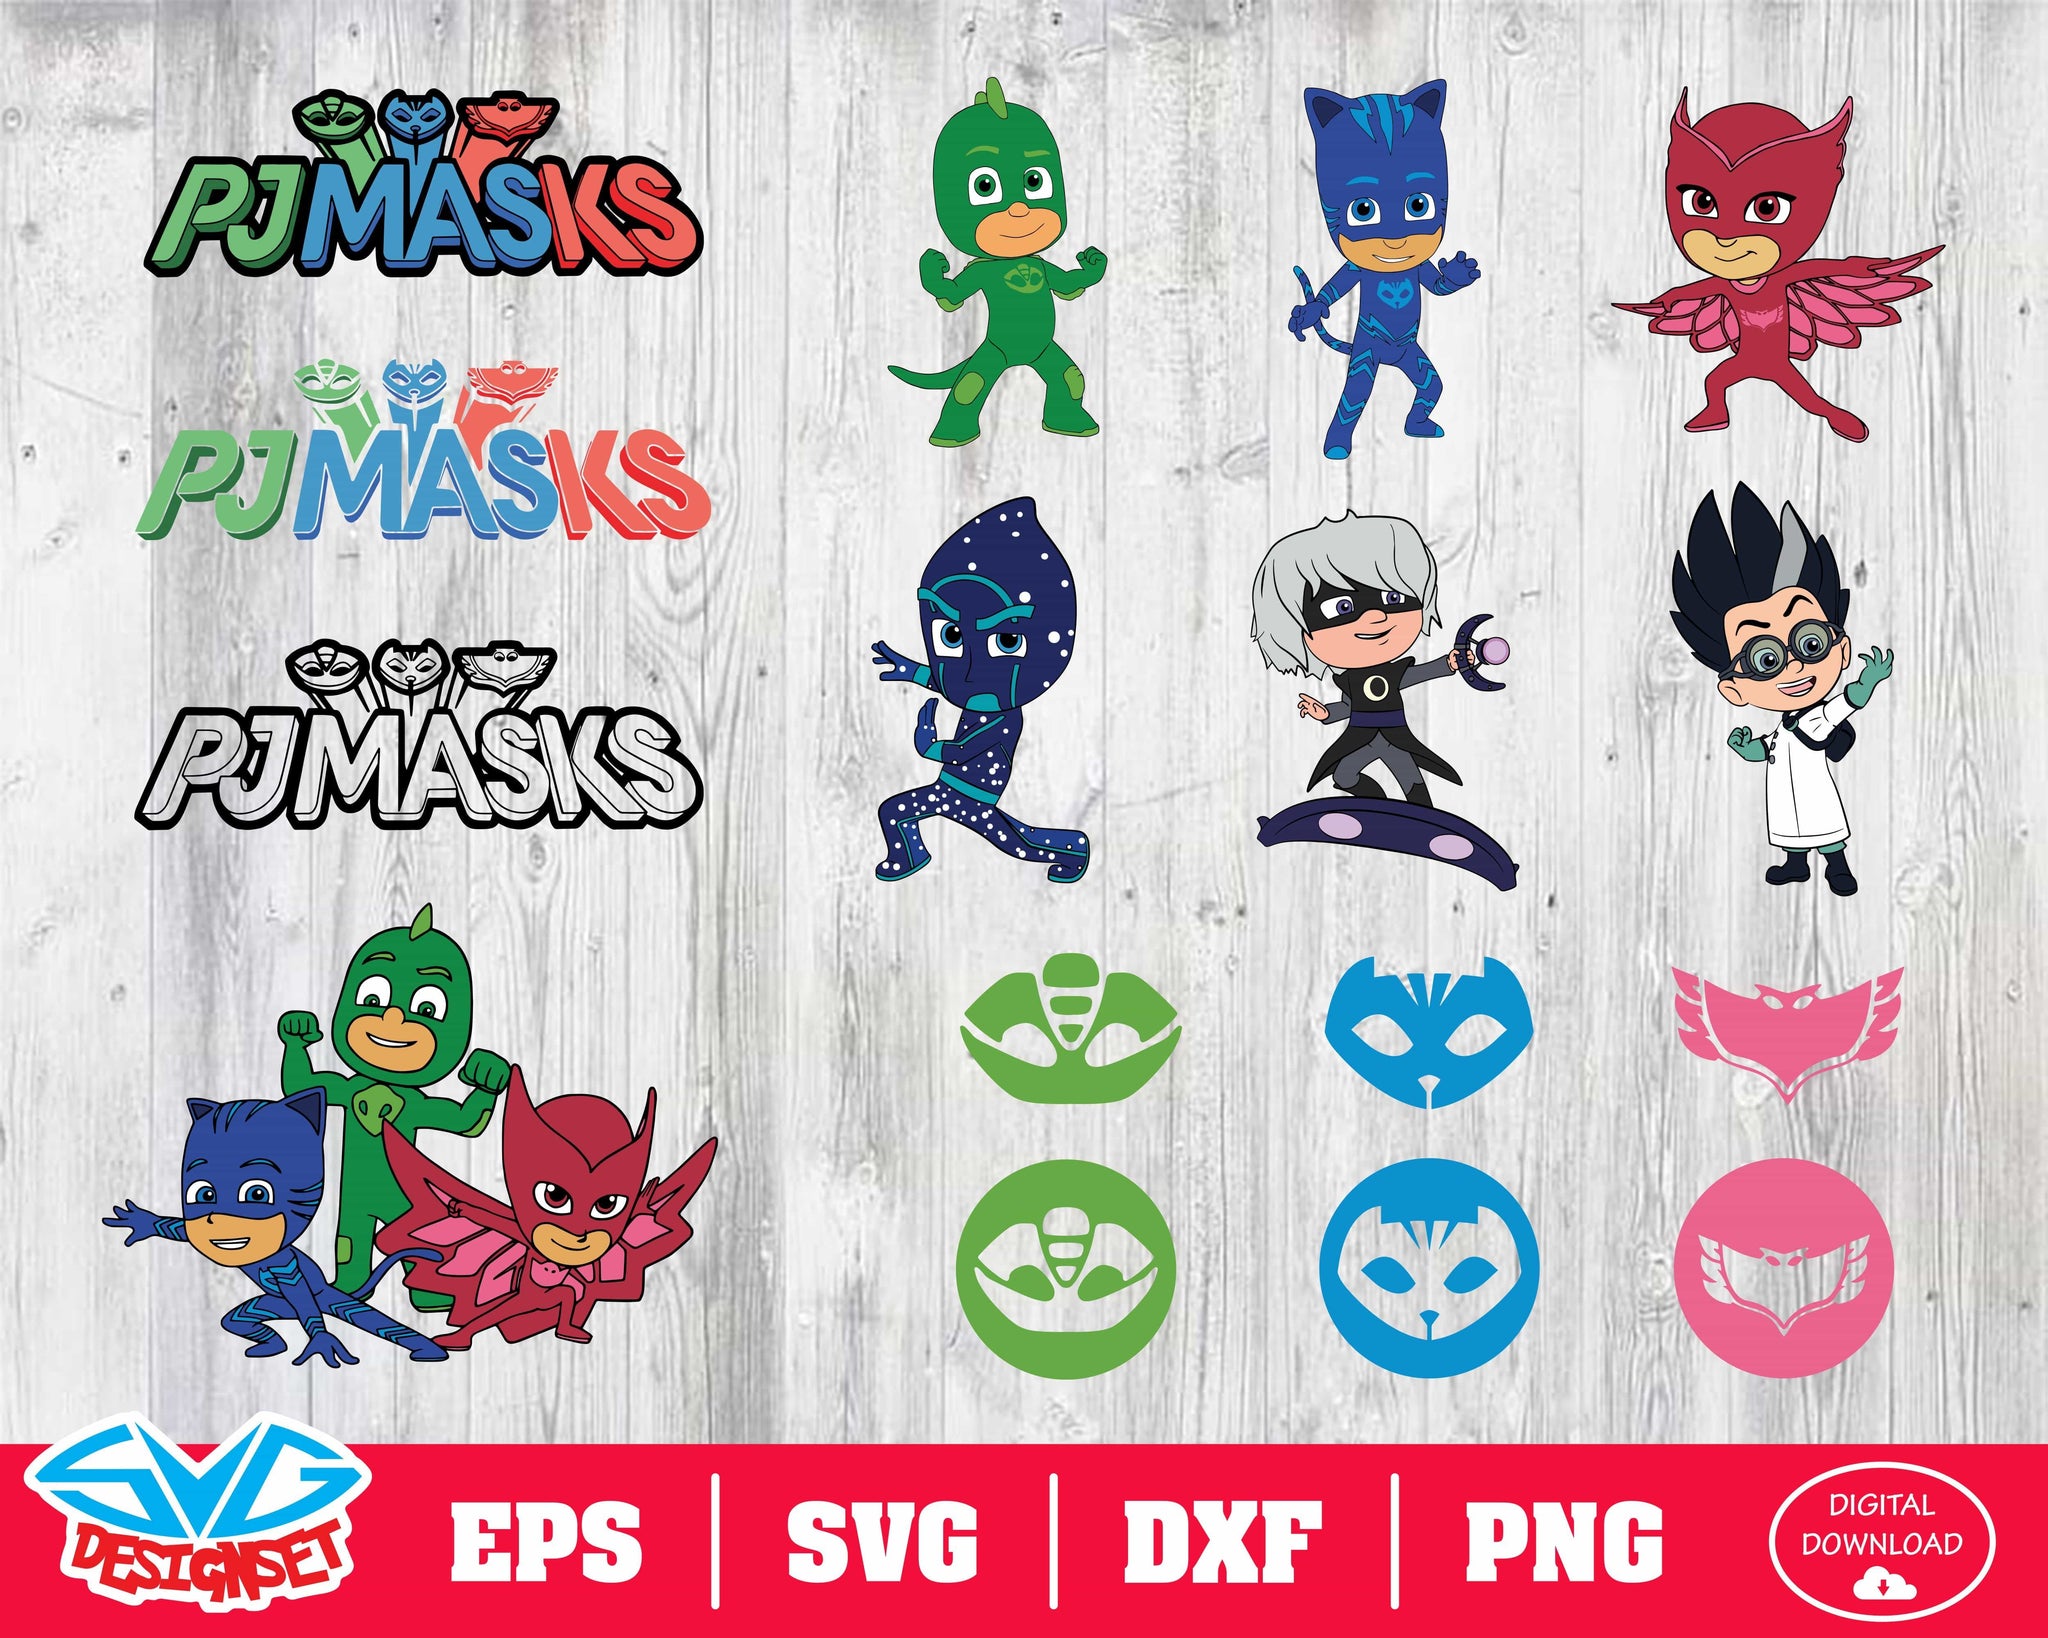 Pj masks Svg, Dxf, Eps, Png, Clipart, Silhouette and Cutfiles #1 - SVGDesignSets